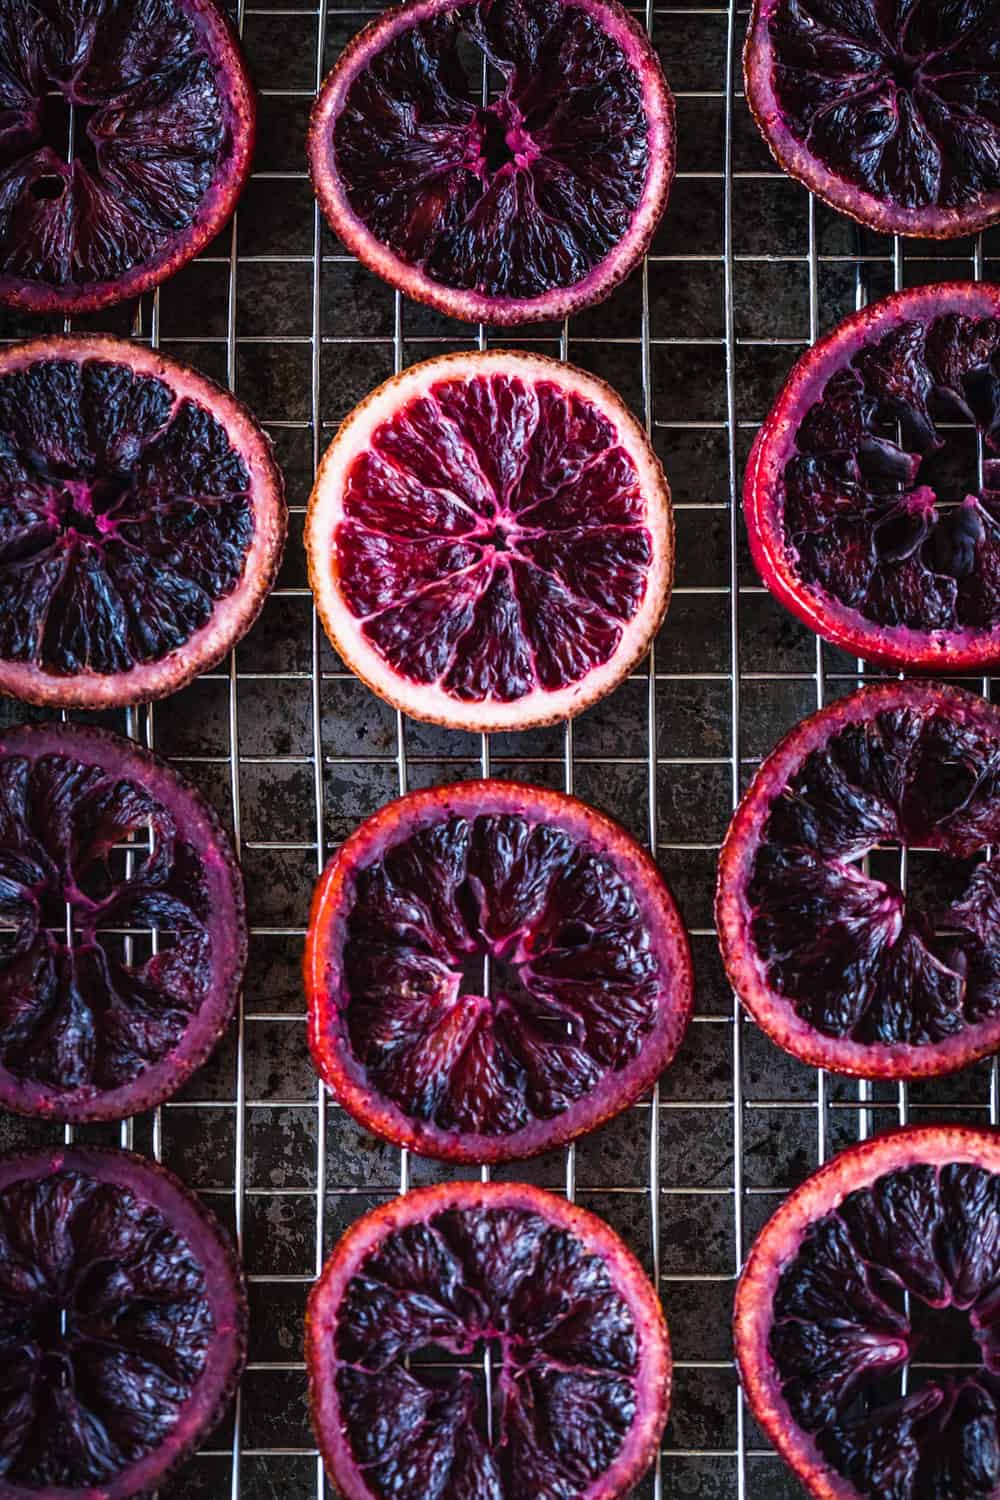 Blood Oranges have been candied and are drying on a cooling rack with a pan underneath to catch any excess drippings.